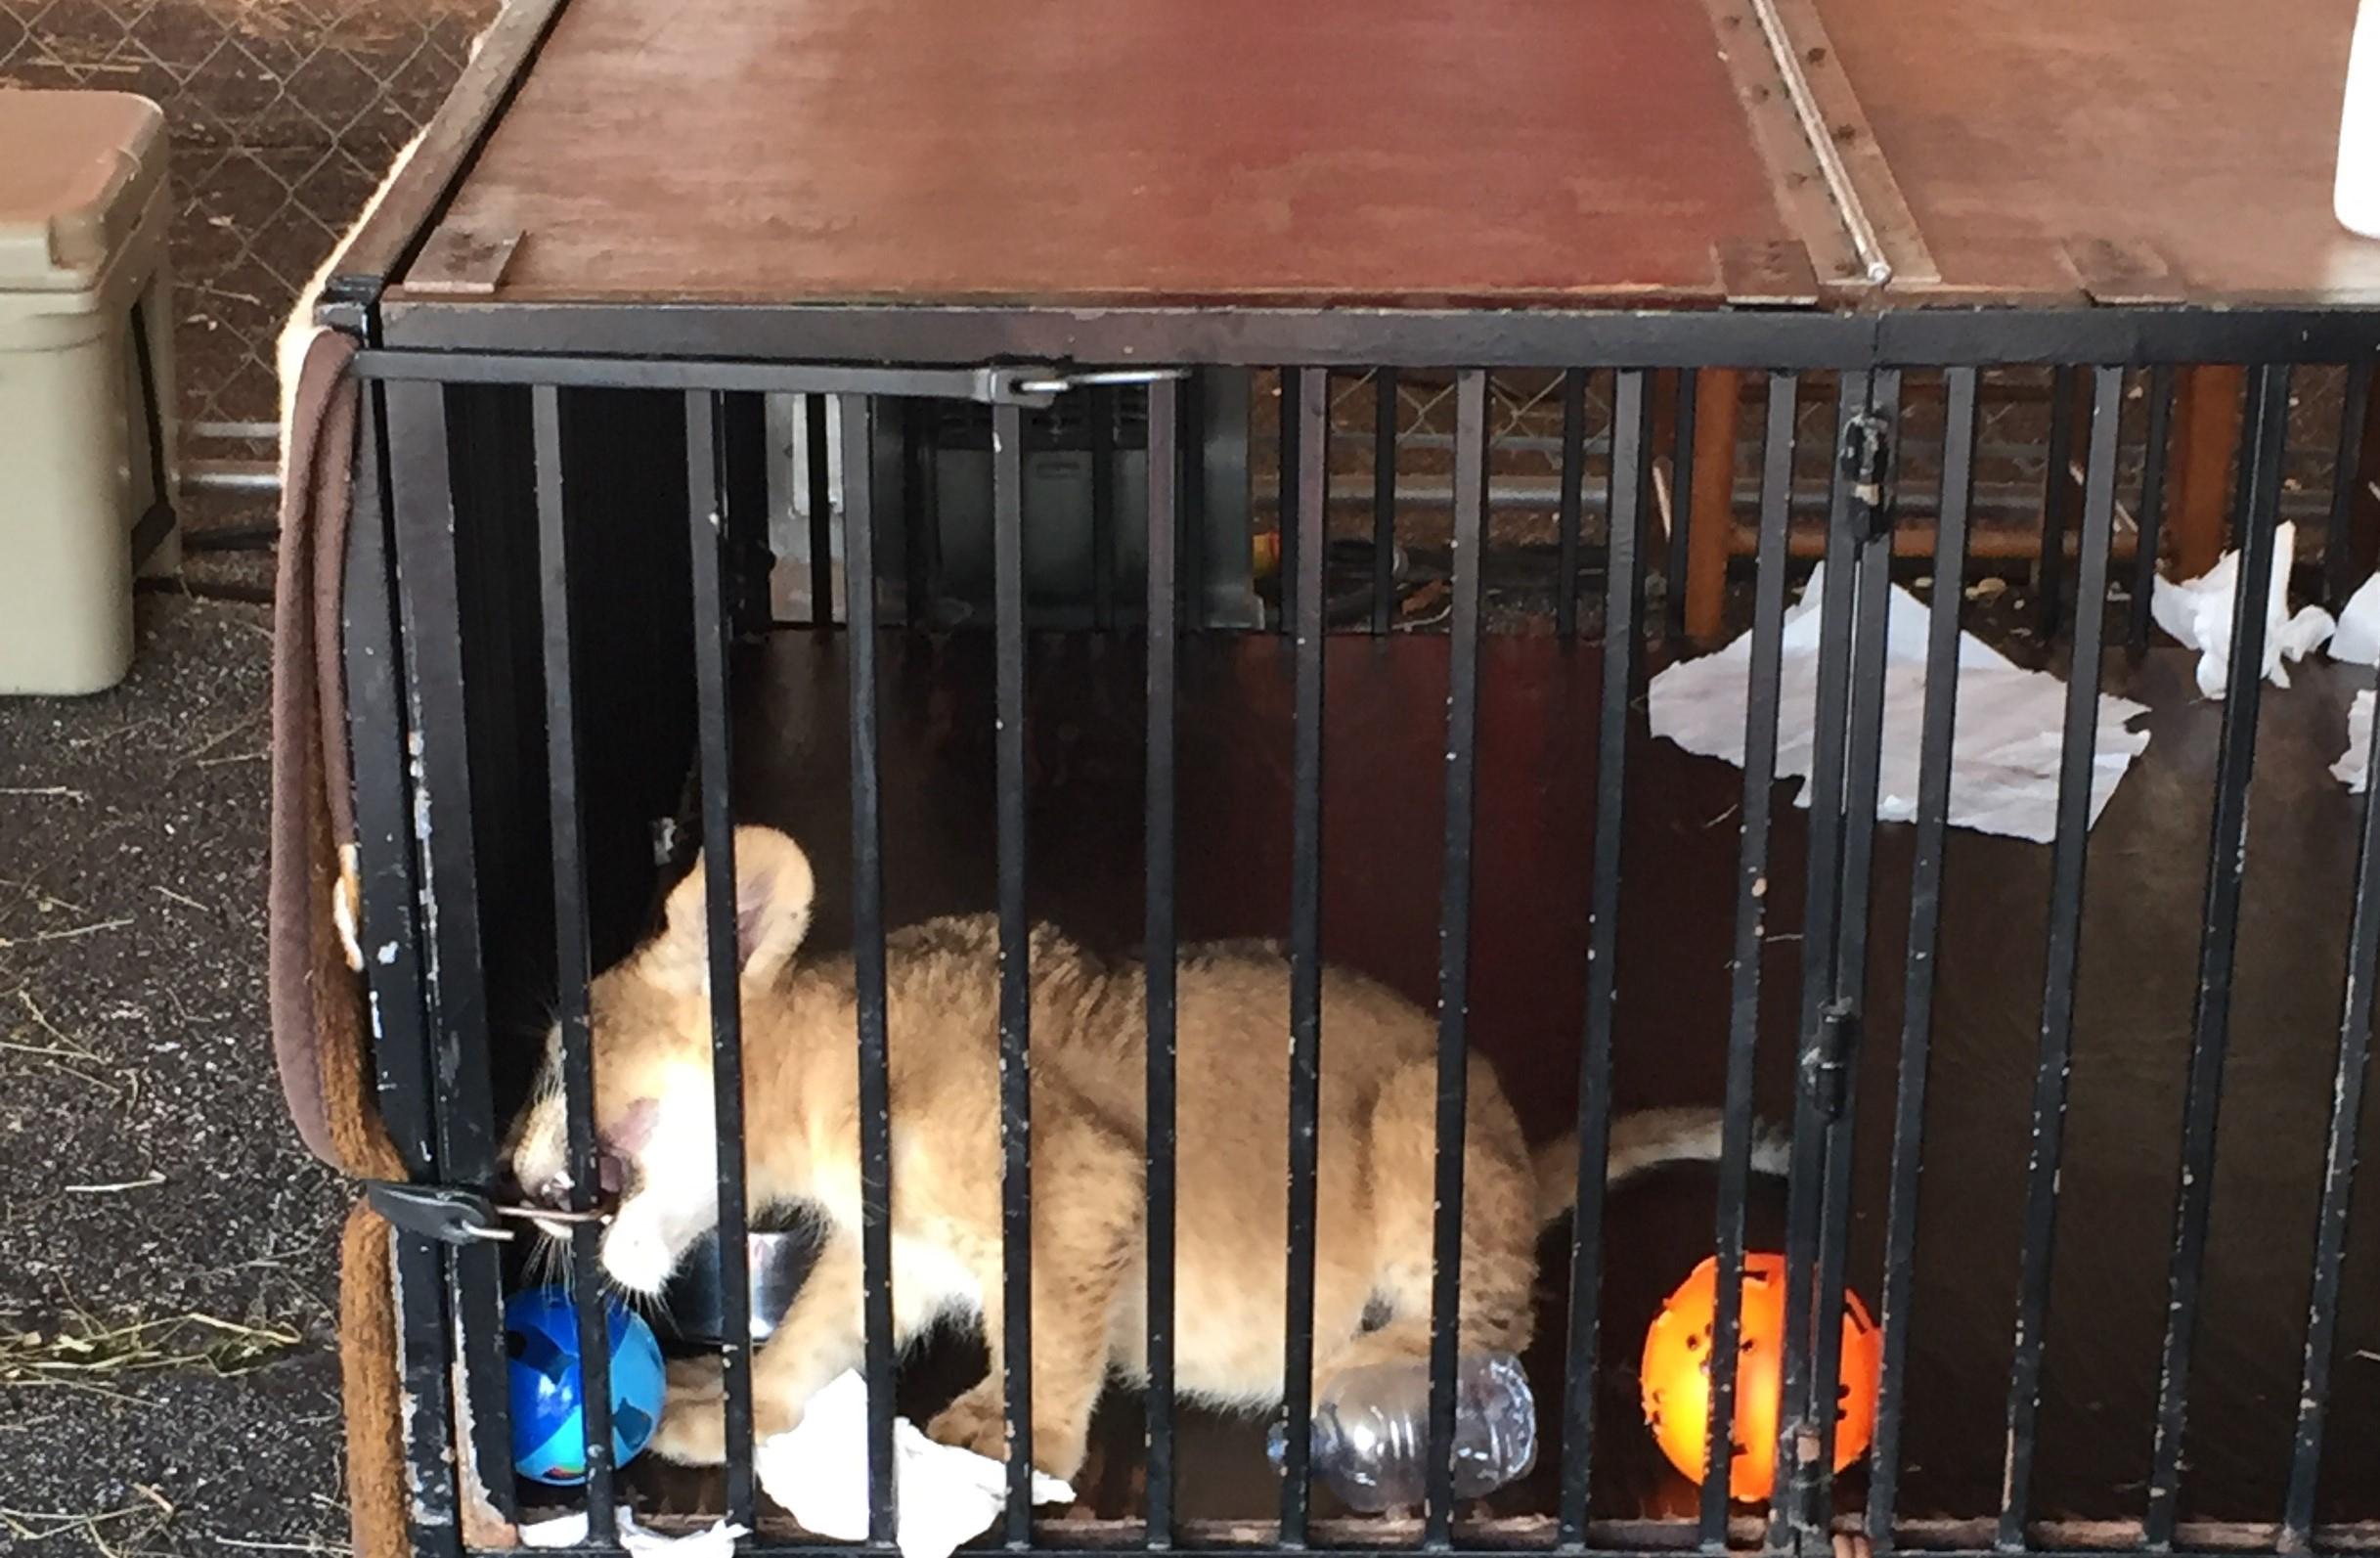 Tony the tiger in cage